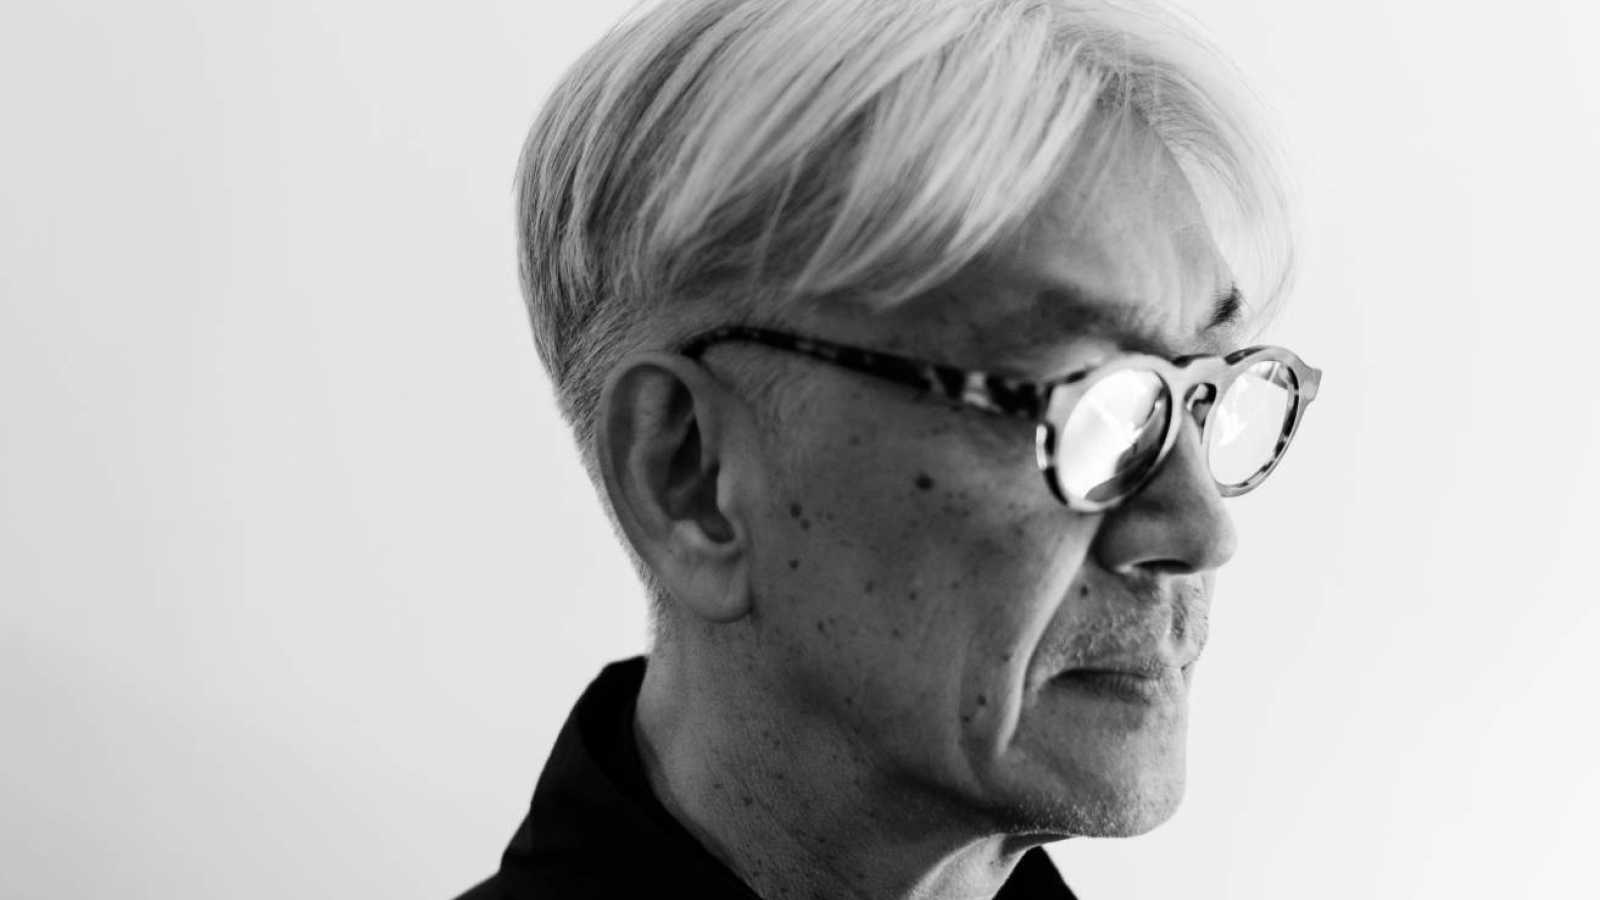 Ryuichi Sakamoto Announces Live Streaming Concert and Box Set Compiling 2020 Releases © Ryuichi Sakamoto. All rights reserved.